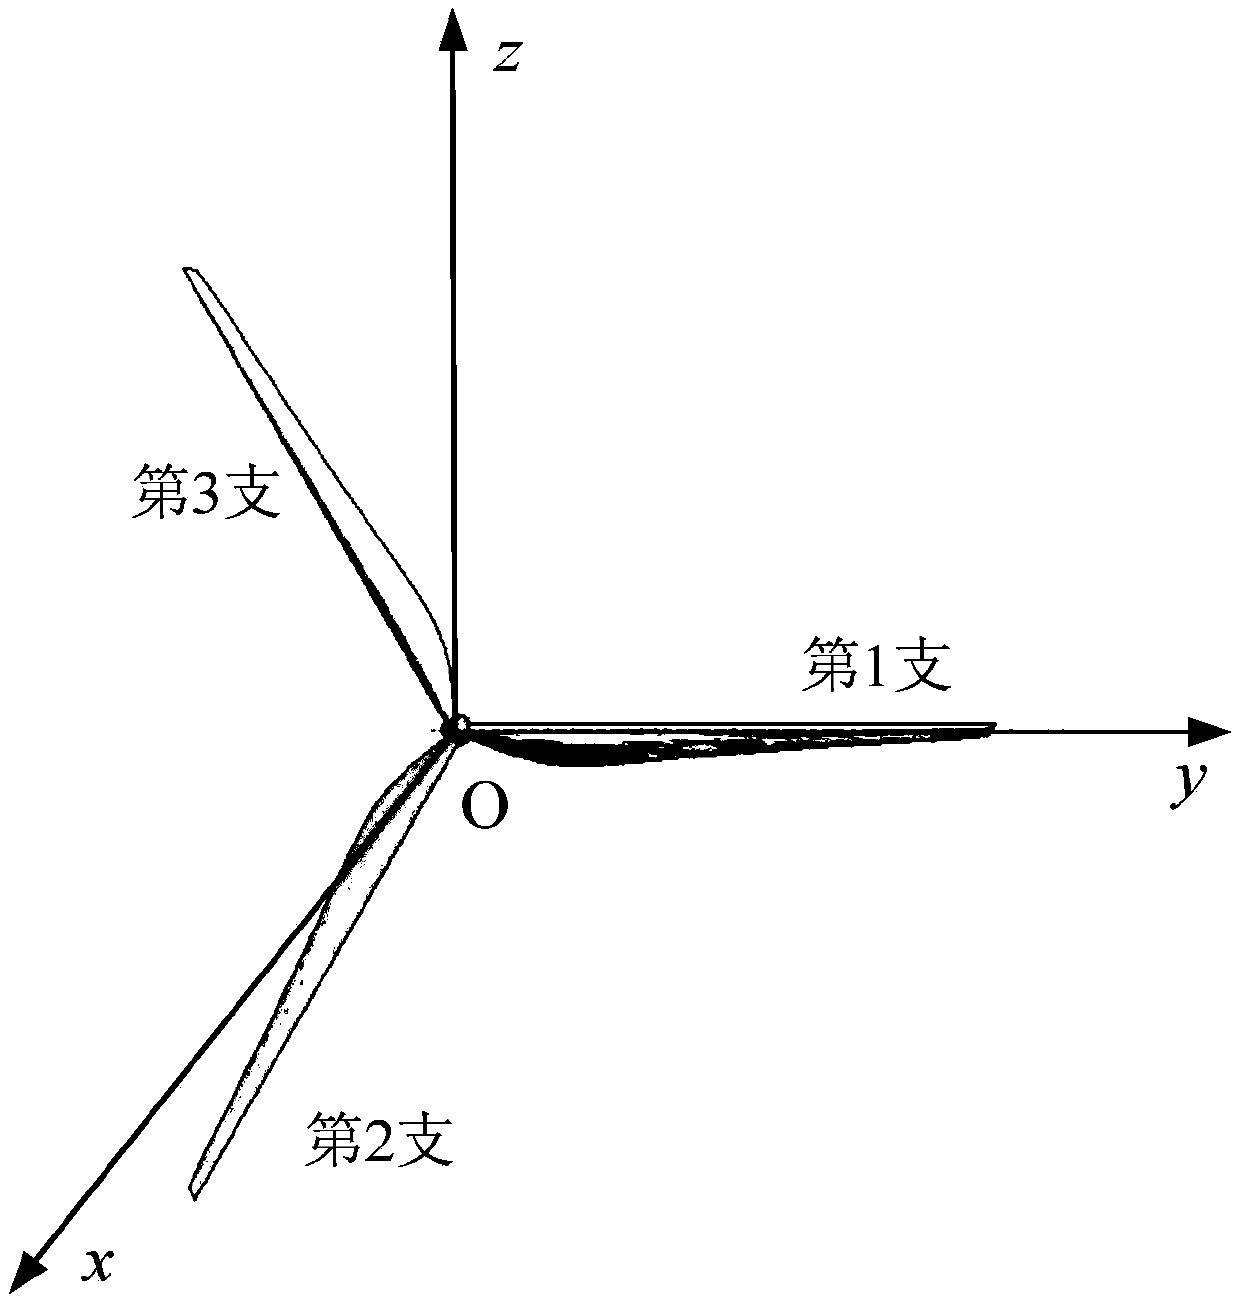 Method for accurately solving wind turbine blade echoes